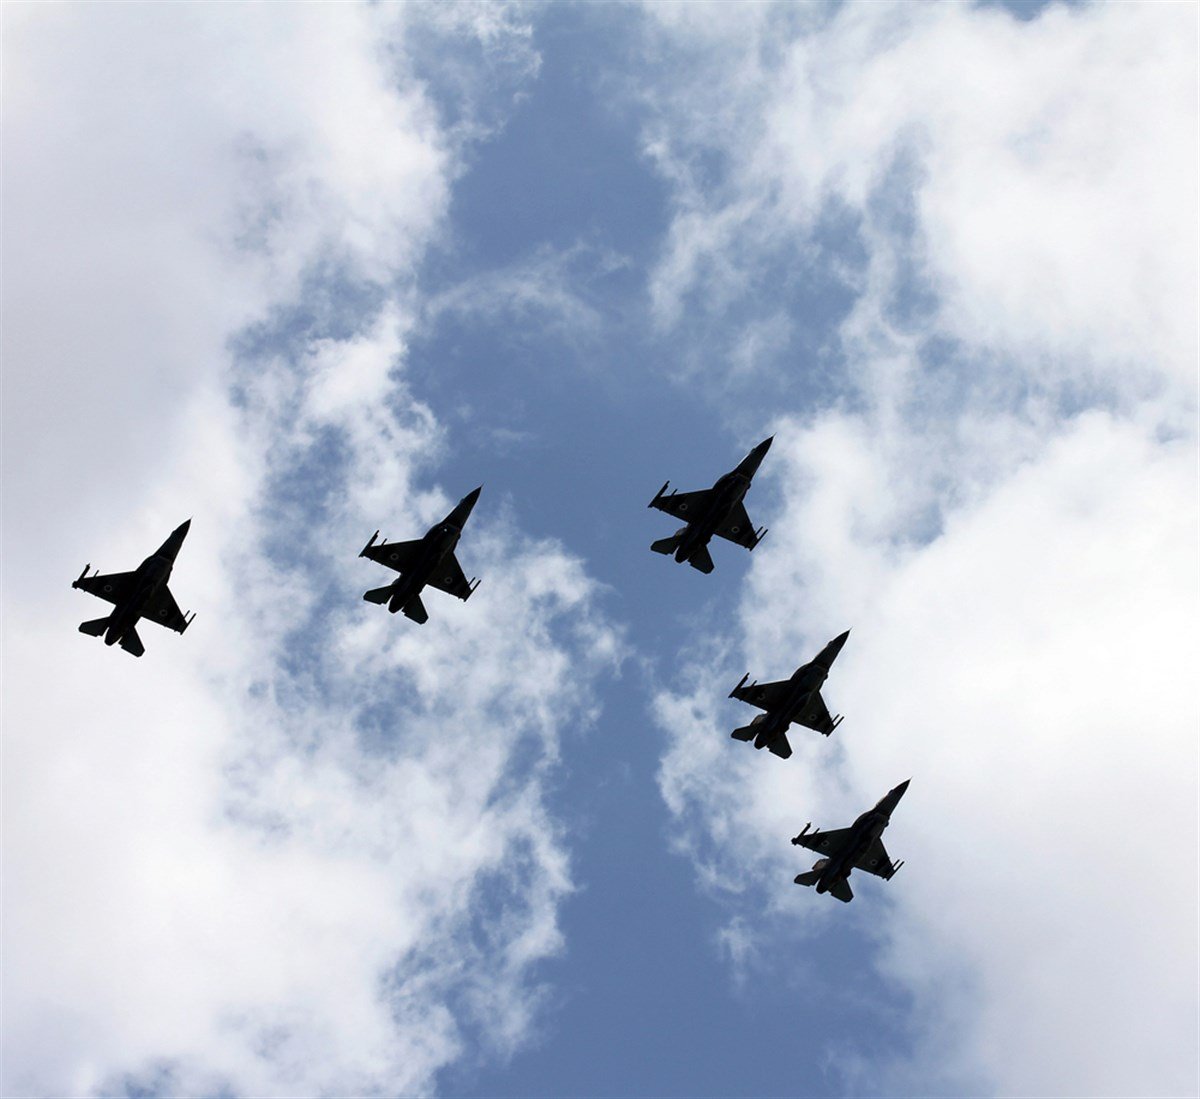 Israeli Air Force airplanes (five jet fighters) at parade in honor of Independence Day - Stock Editorial Photography